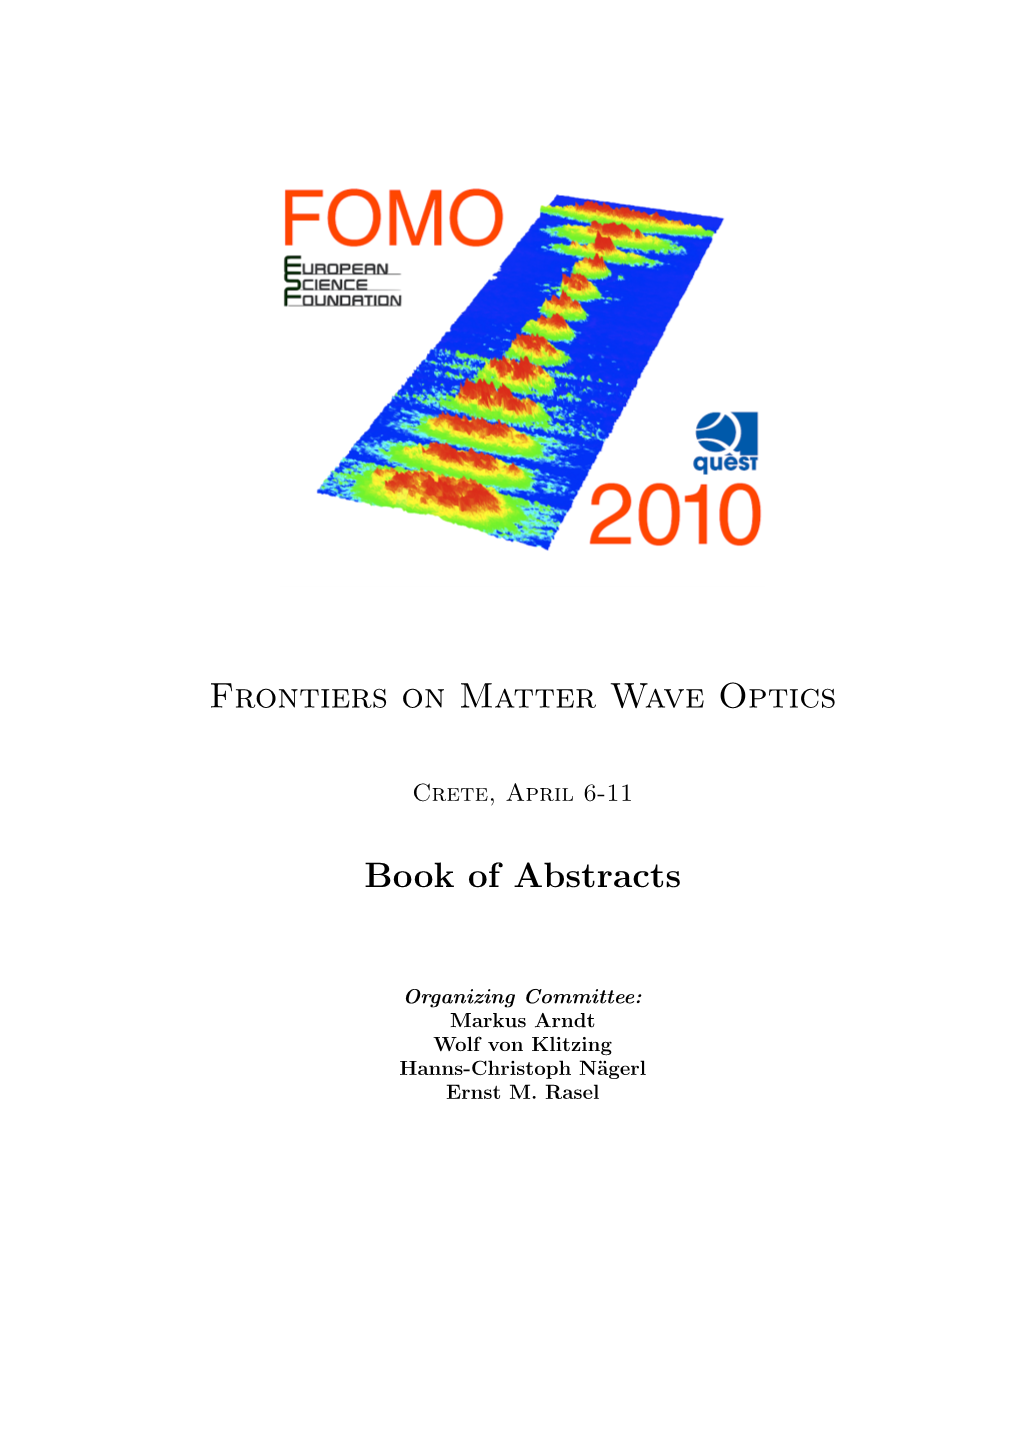 Frontiers on Matter Wave Optics Book of Abstracts